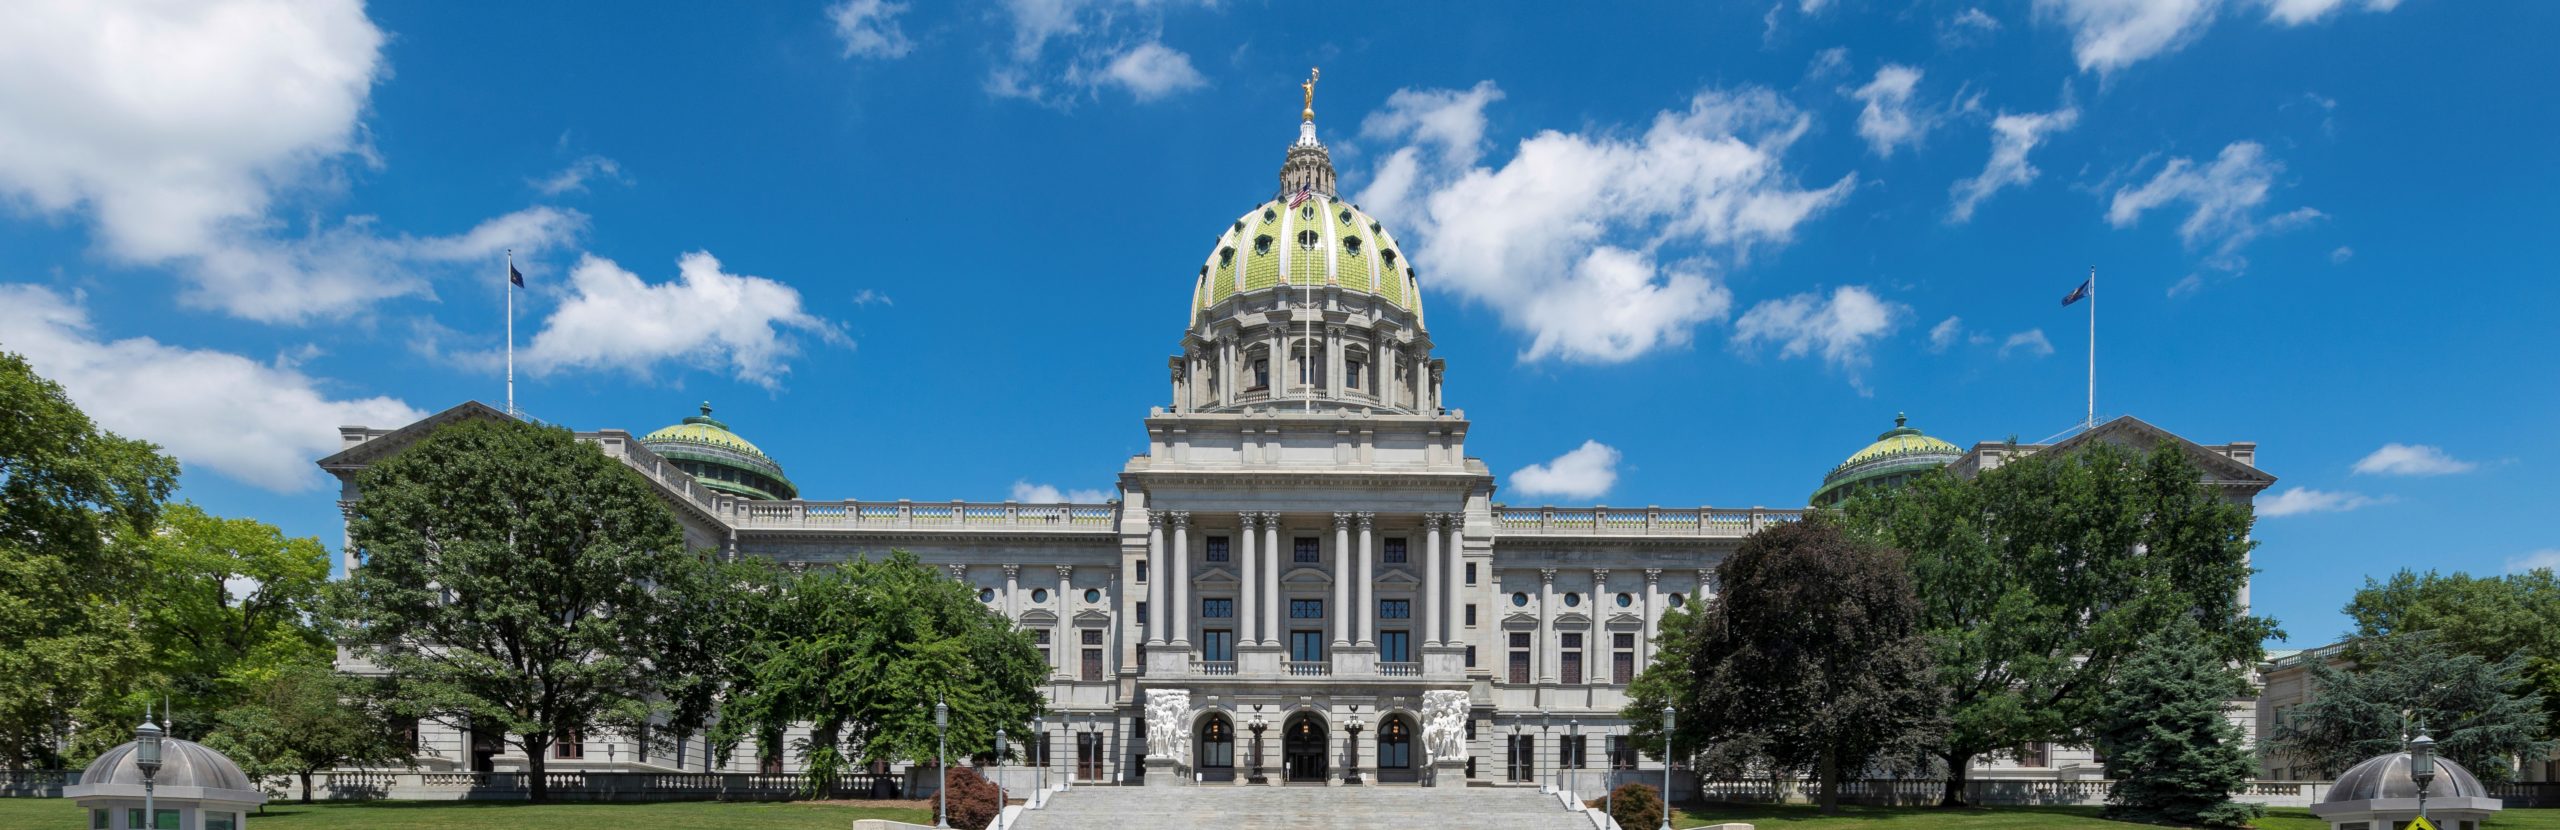 Panoramic view of the Pennsylvania State Capitol